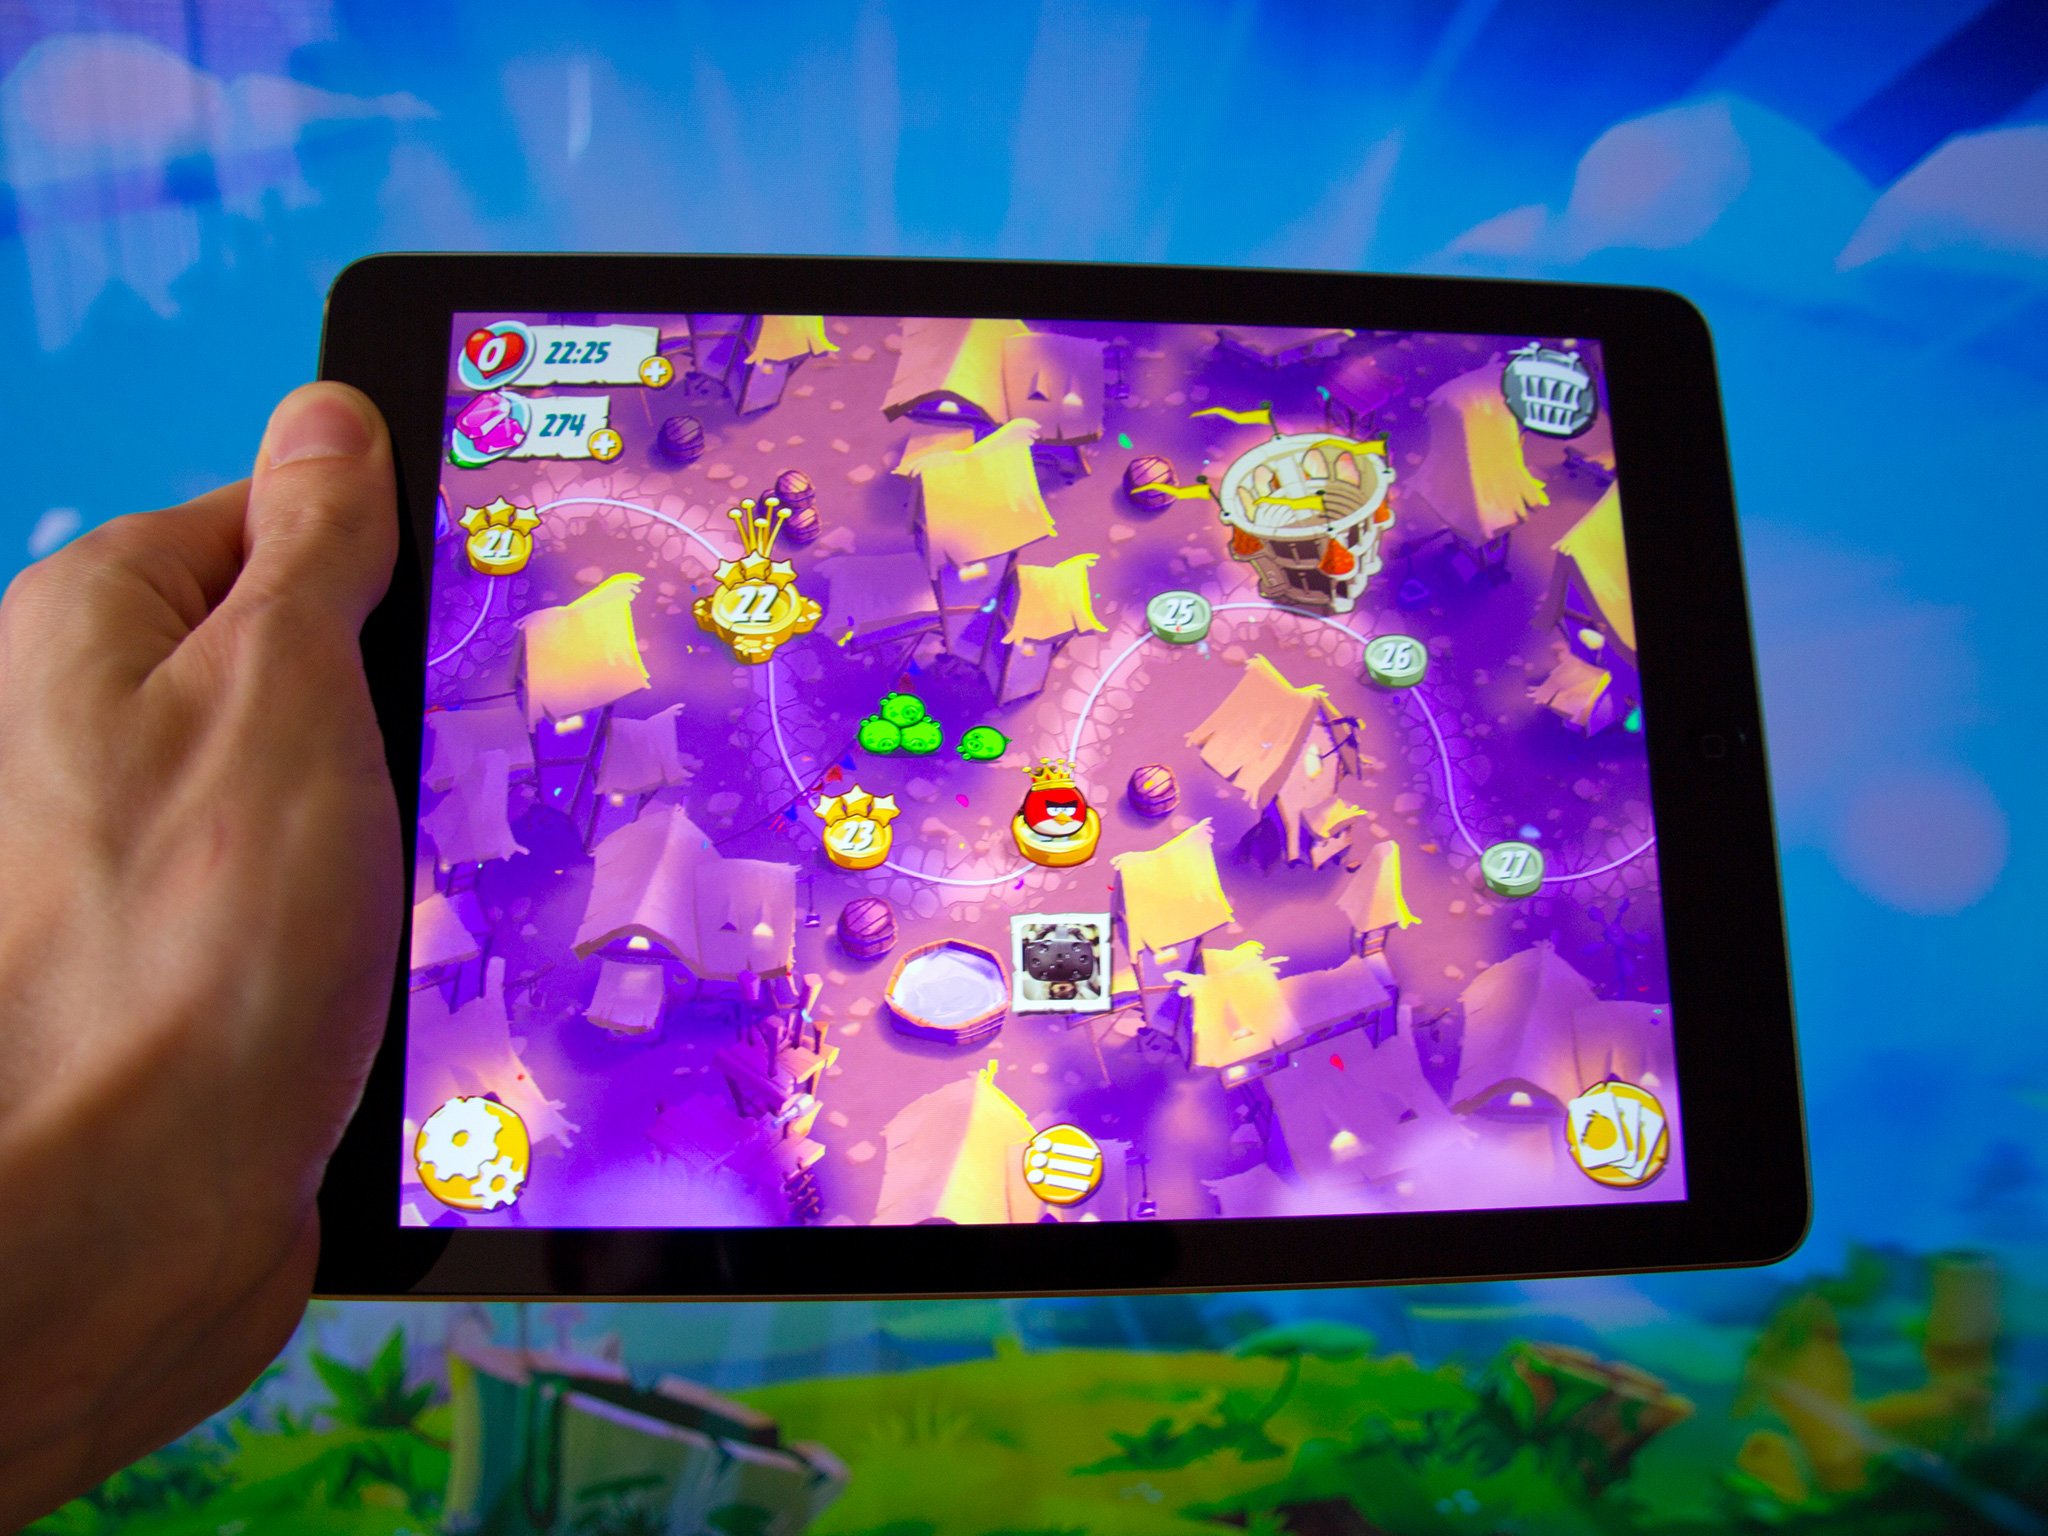 Angry Birds 2: Tips, tricks, and cheats for crushing piggies